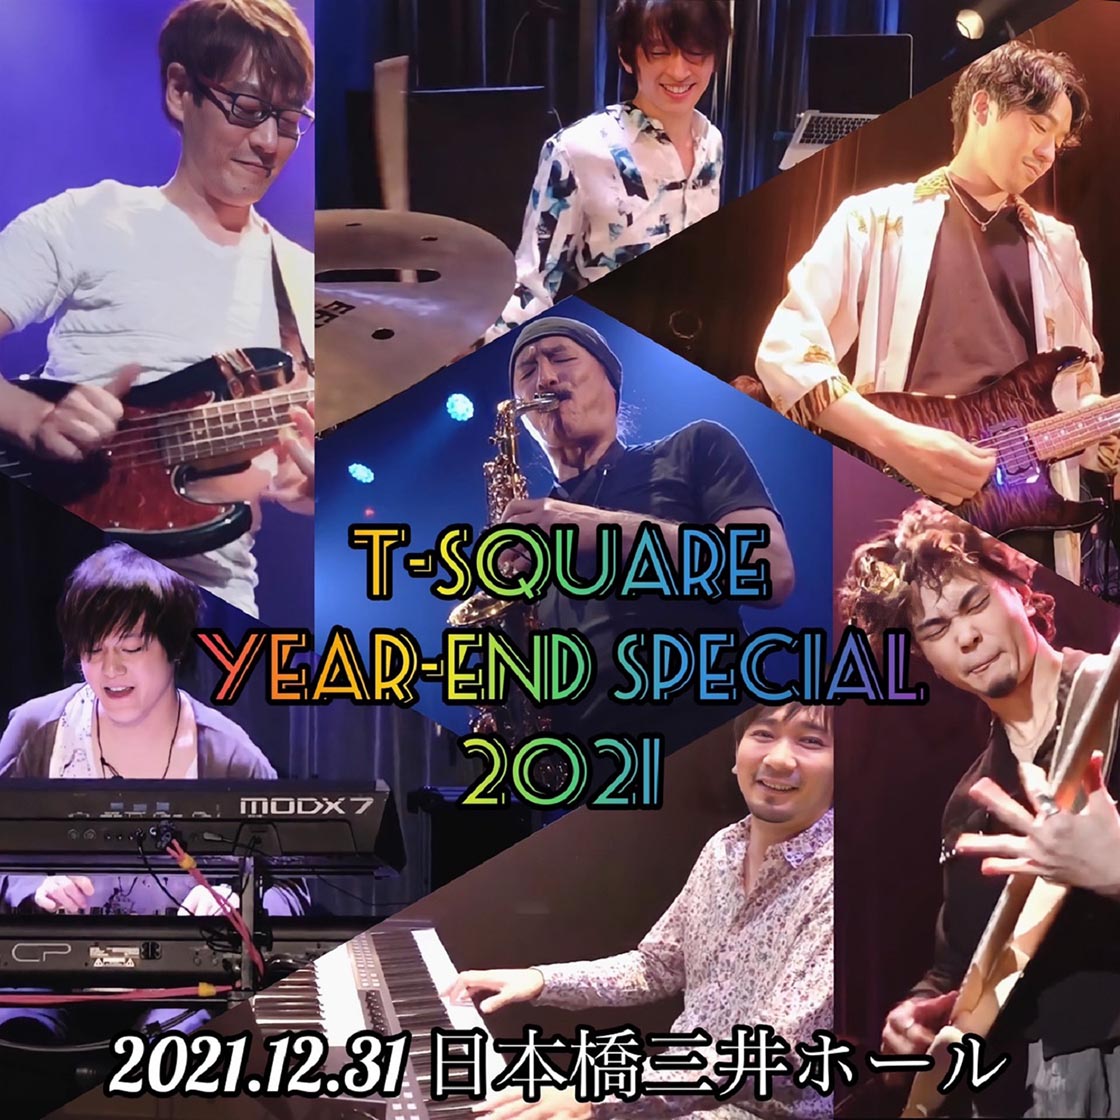 T-SQUARE、1月18日(水)より「”T-SQUARE YEAR-END SPECIAL 2021″@日本橋 